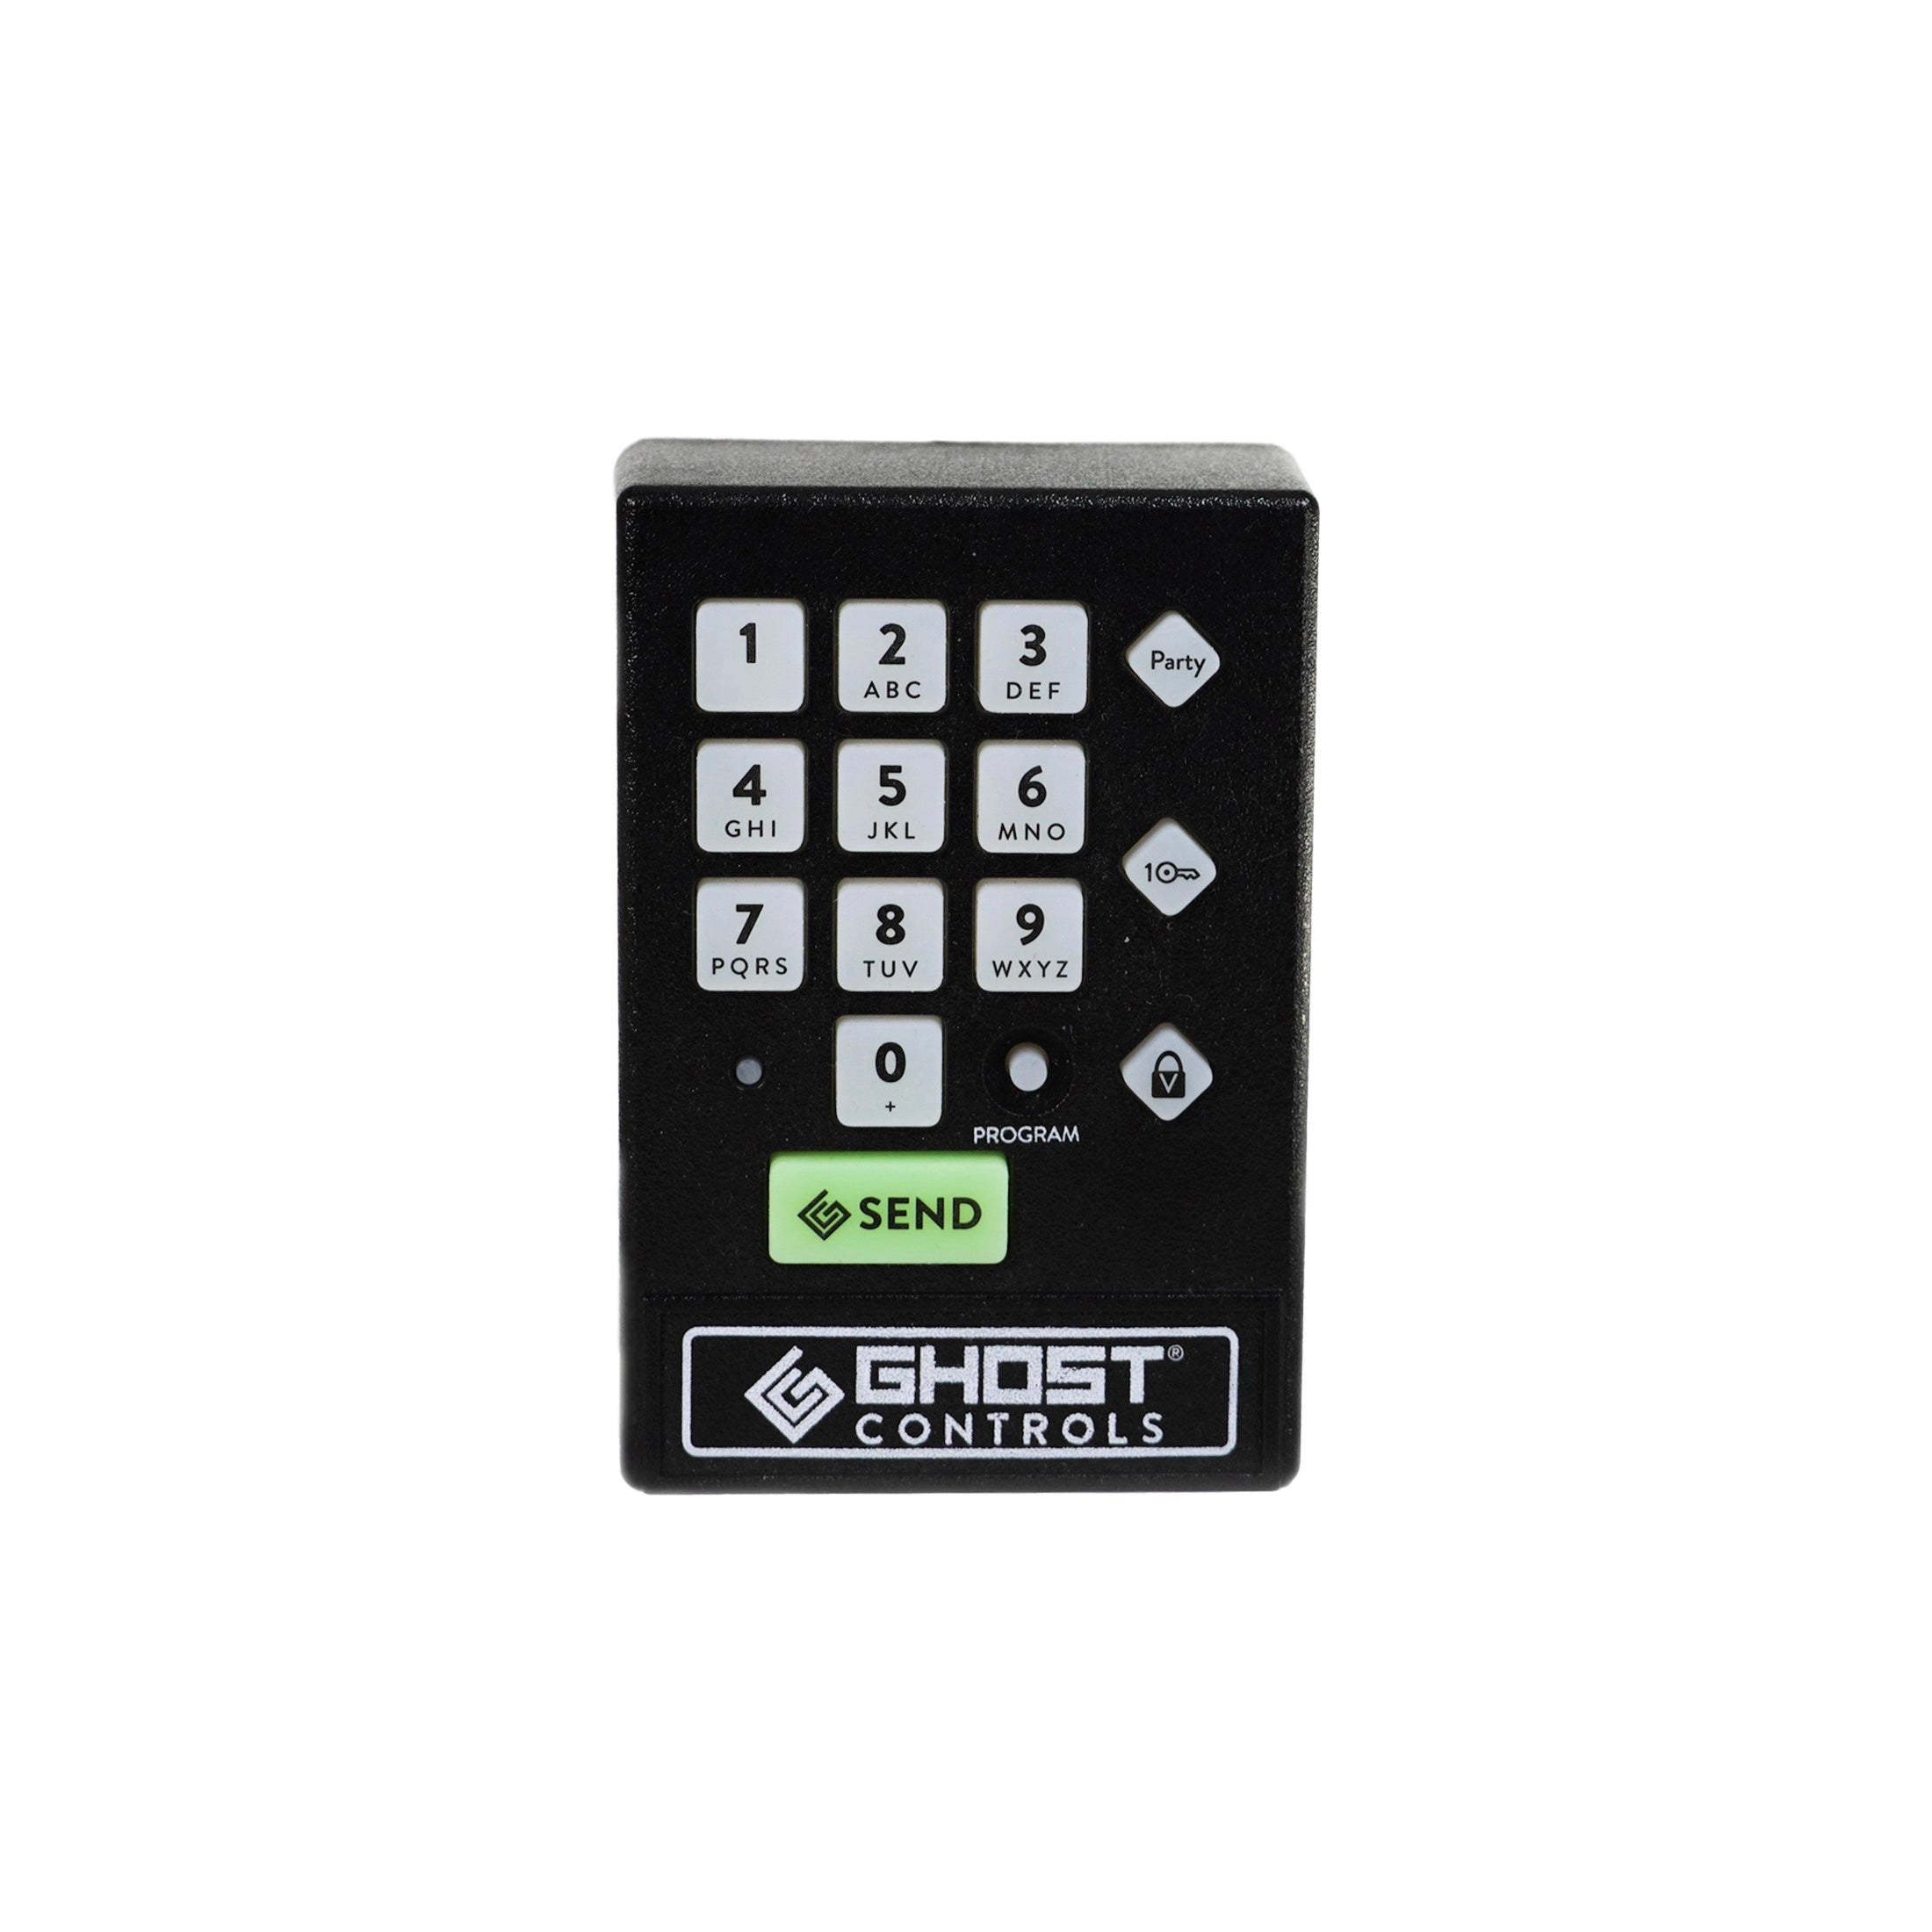 ghost controls wireless keypad with up to 40 unique codes and partymode and vacationmode